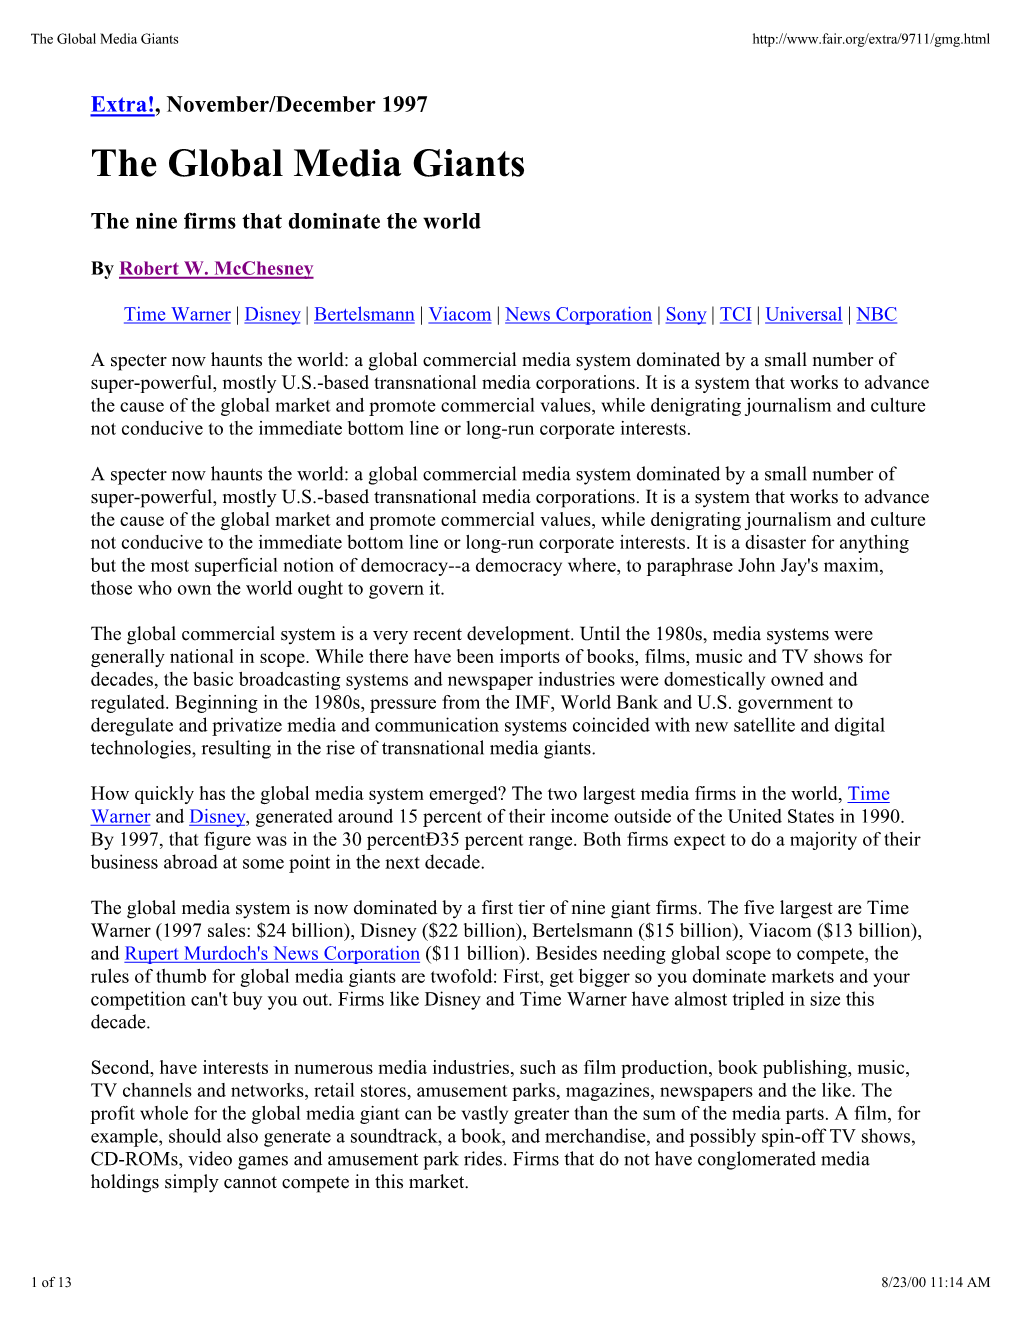 The Global Media Giants: the Nine Firms That Dominate the World